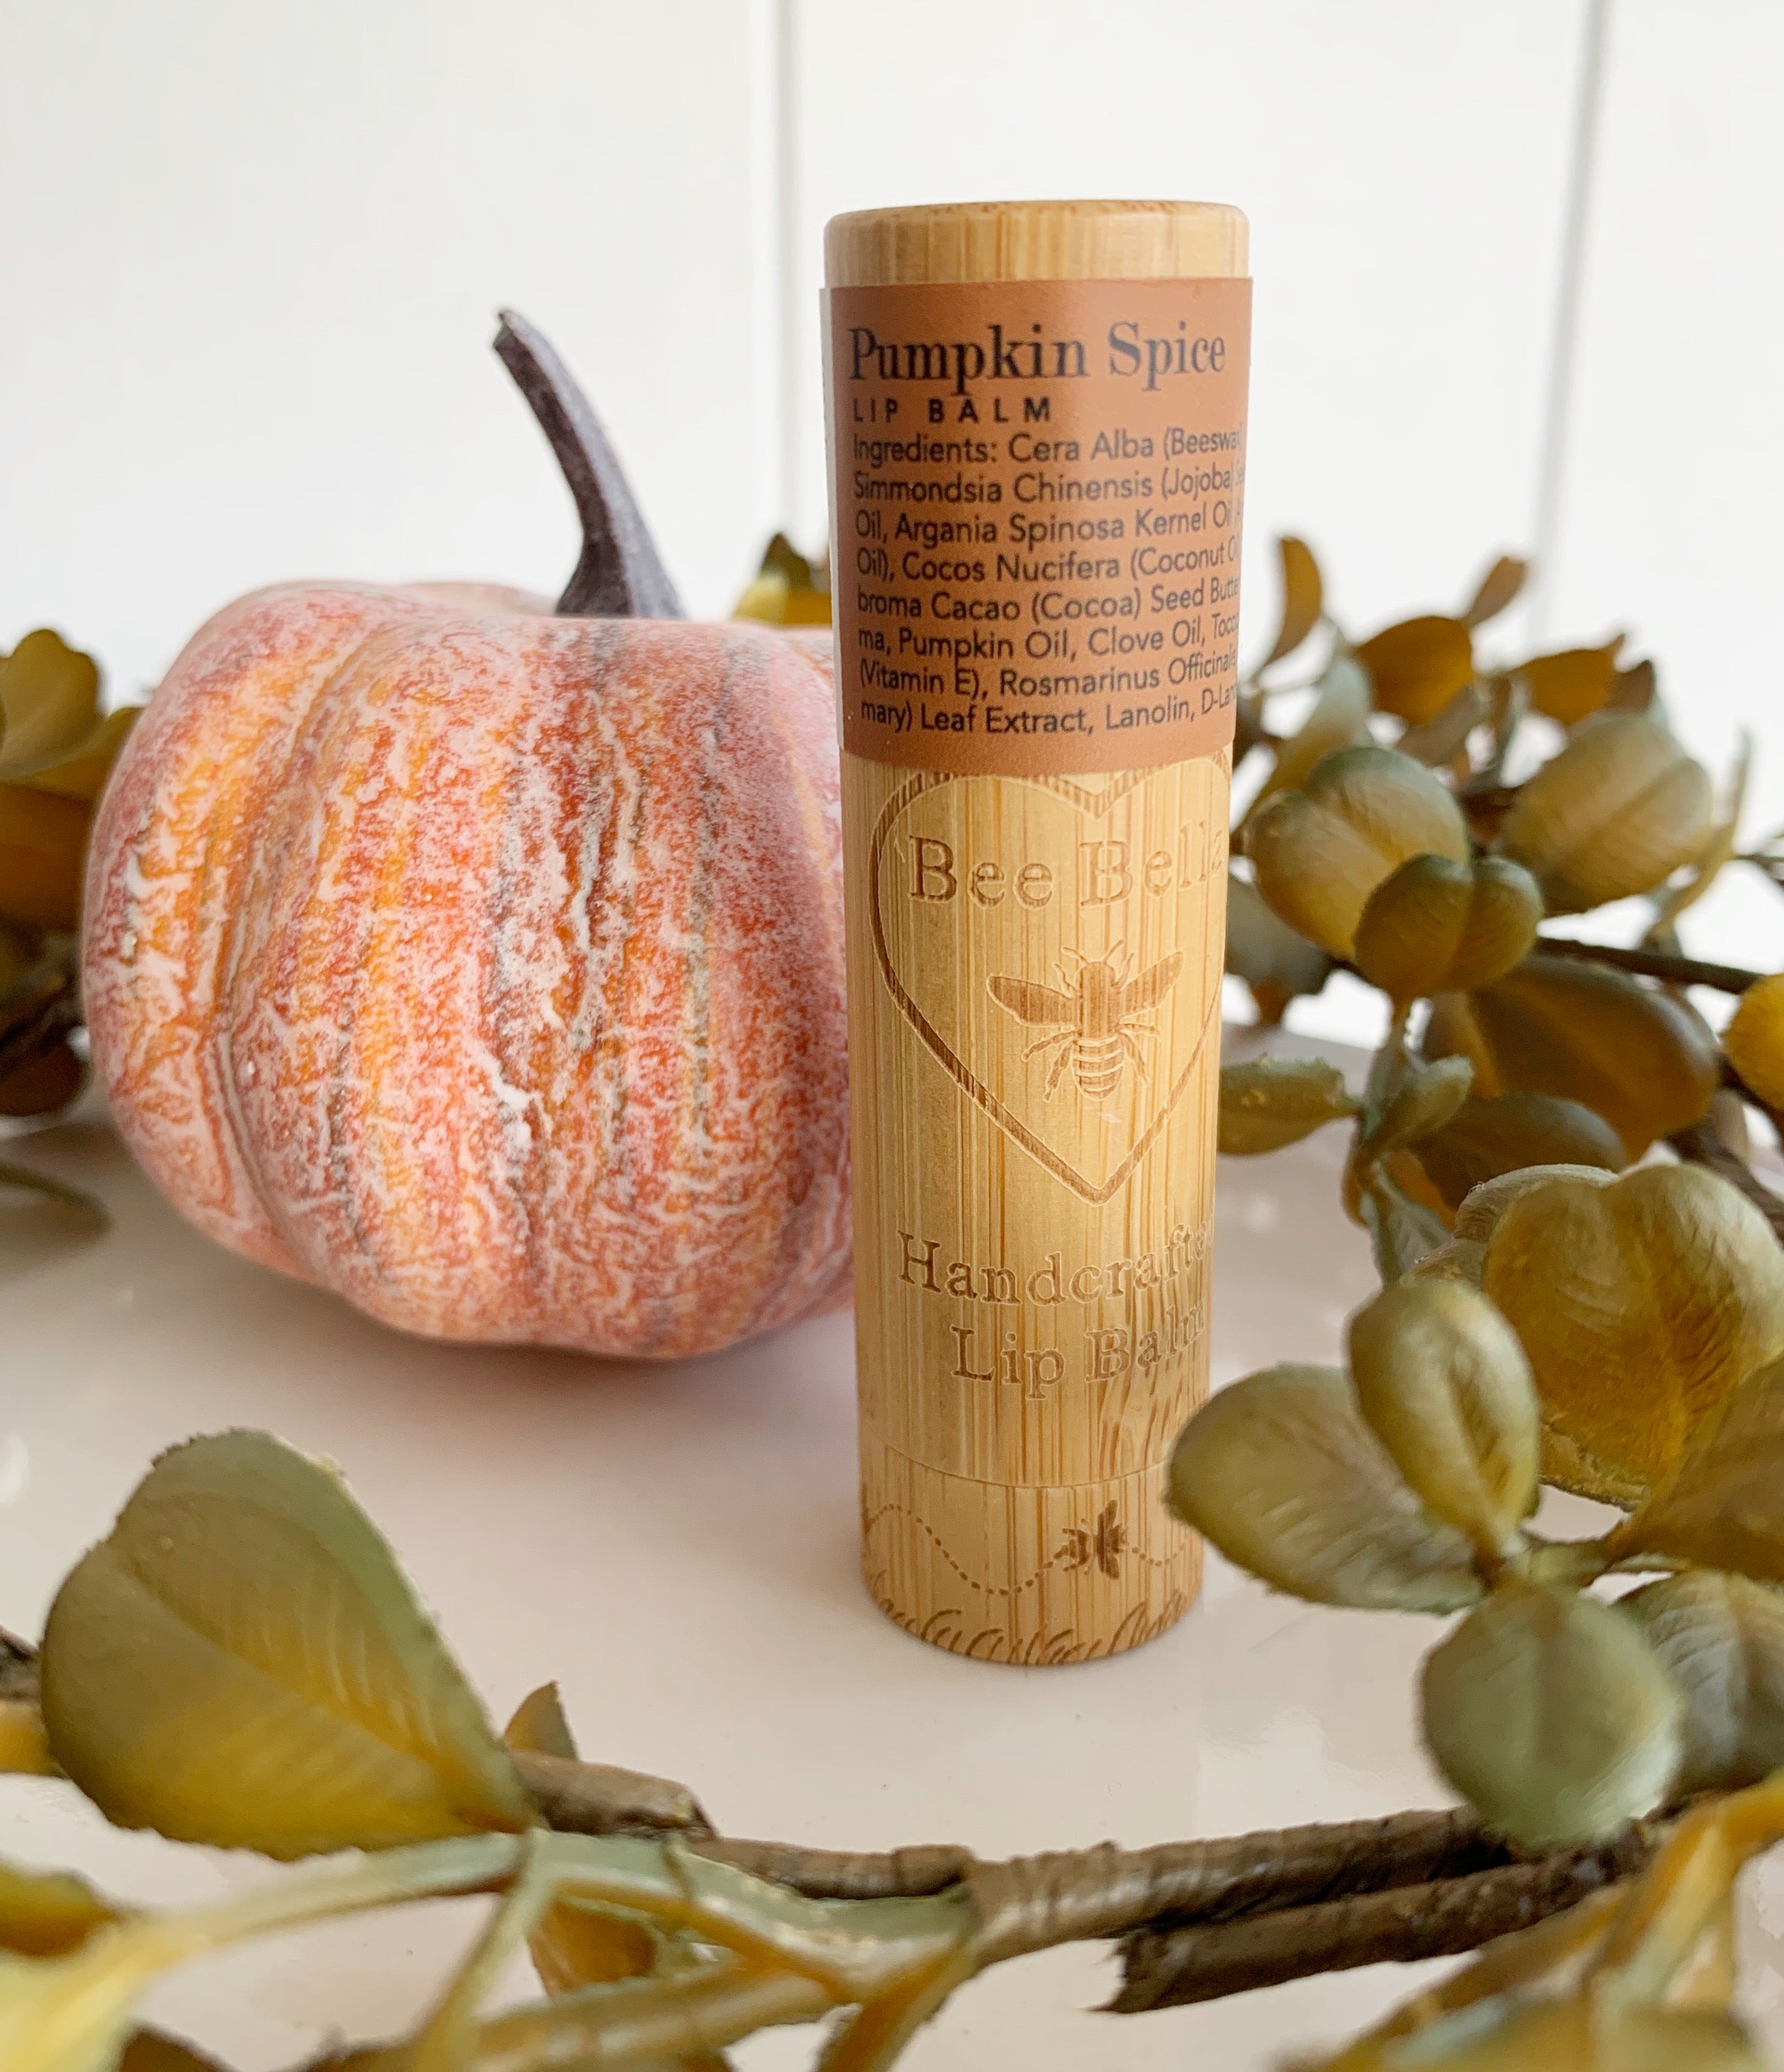 Wooden pumpkin spice lip balm tube with bee bella logo embossed and a brown flavor label at the top. Sitting upright surrounded by greenery and a pumpkin to the left.